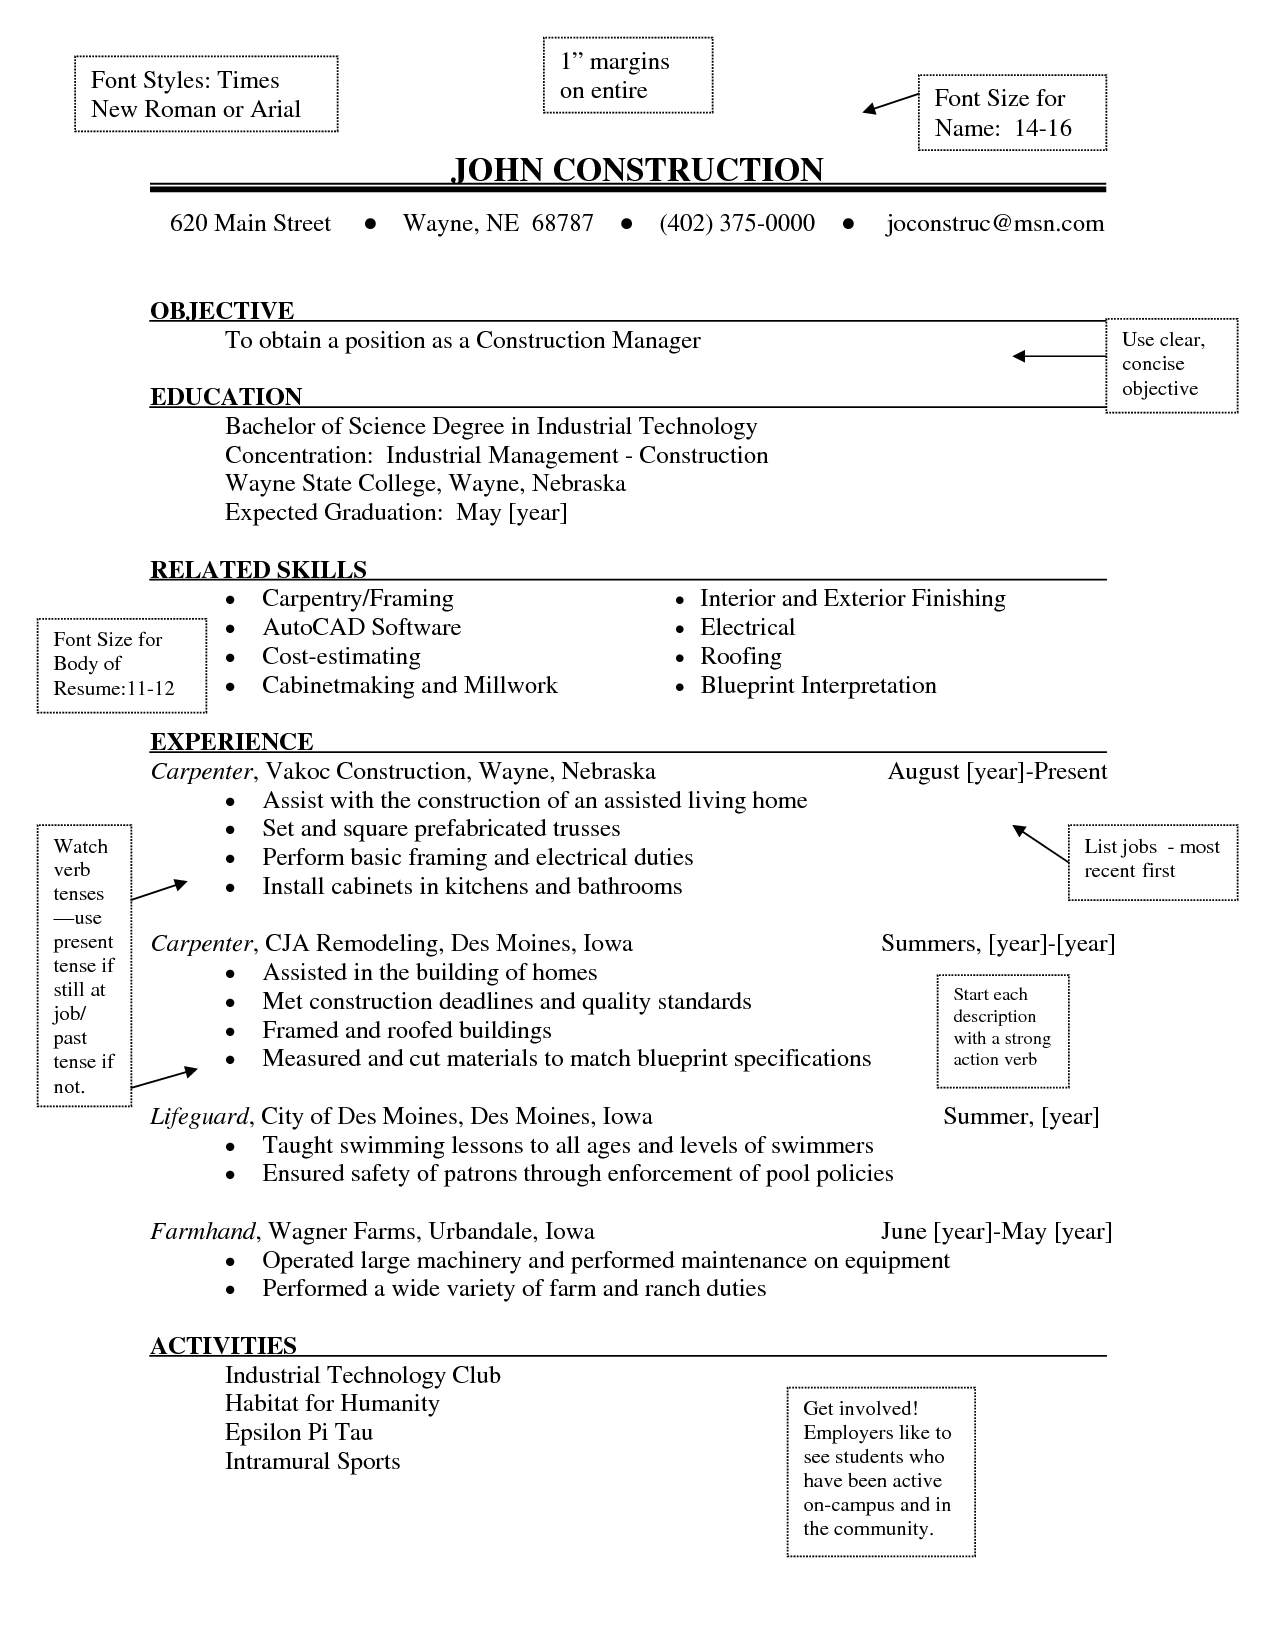 Resume Format And Font Size